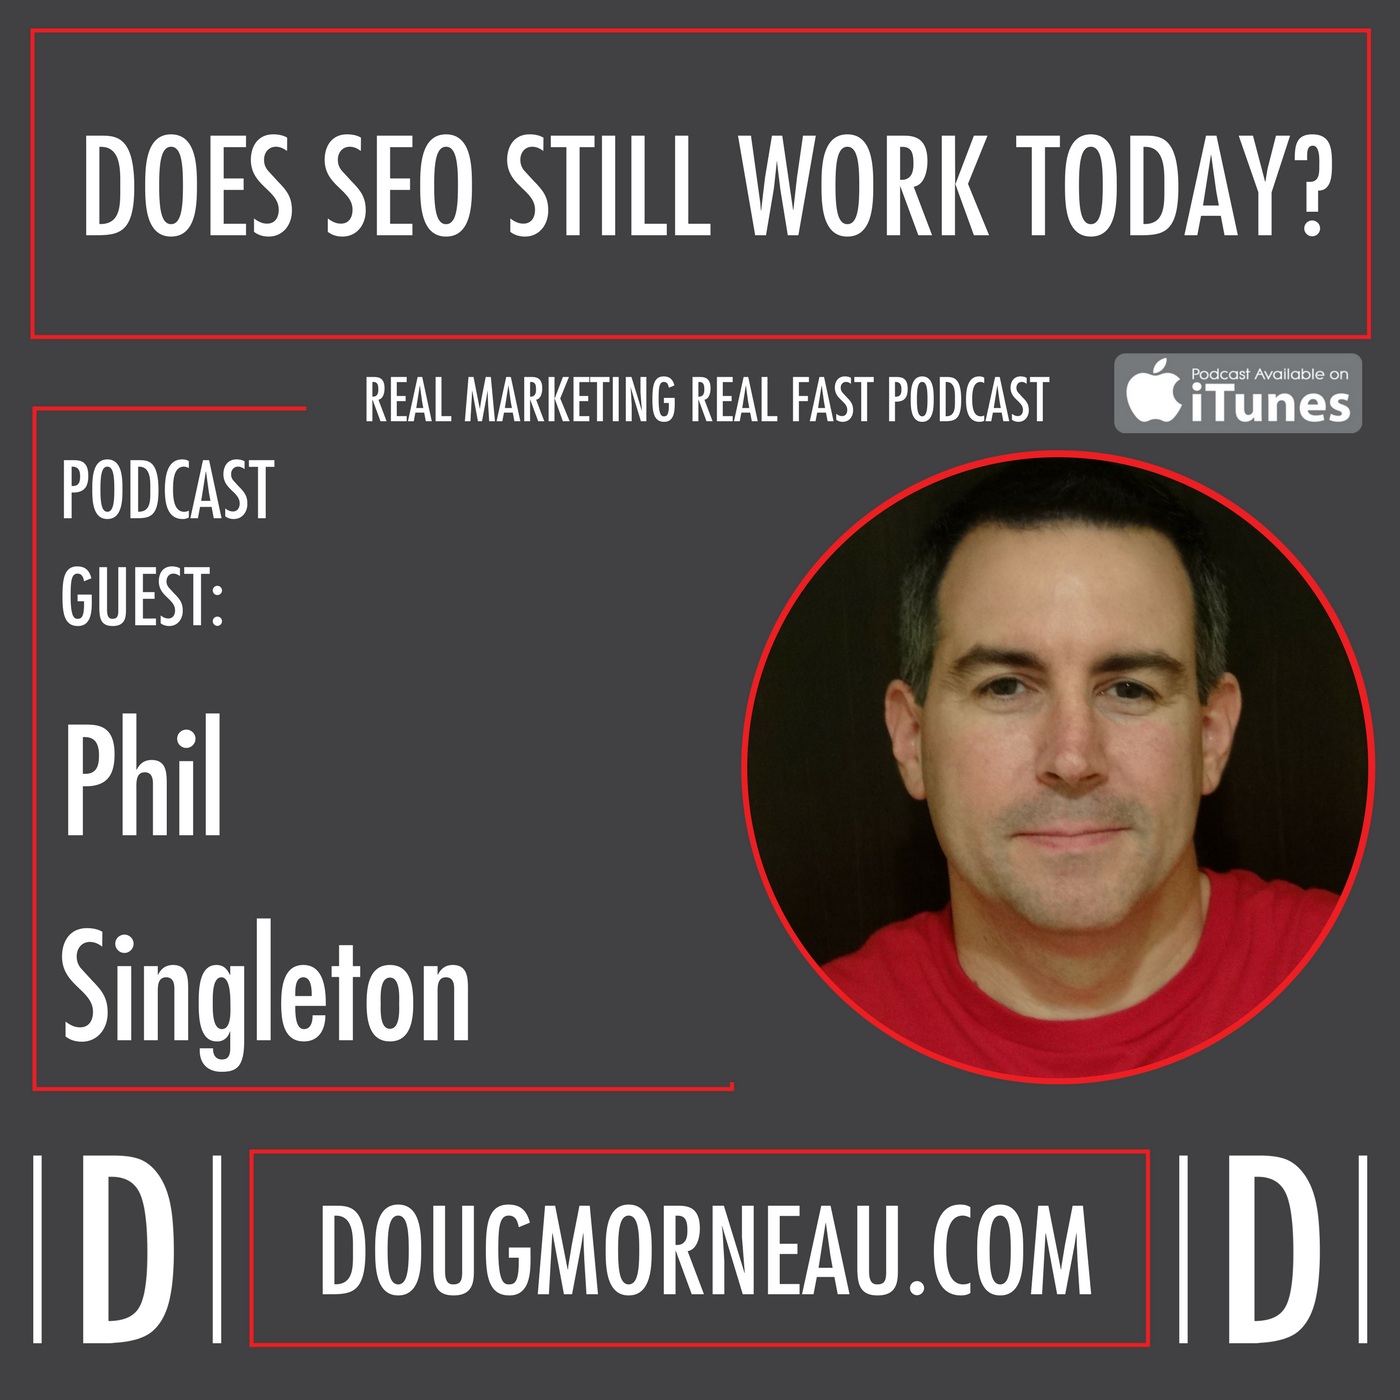 DOES SEO STILL WORK TODAY? - PHIL SINGLETON - DOUG MORNEAU - REAL MARKETING REAL FAST PODCAST